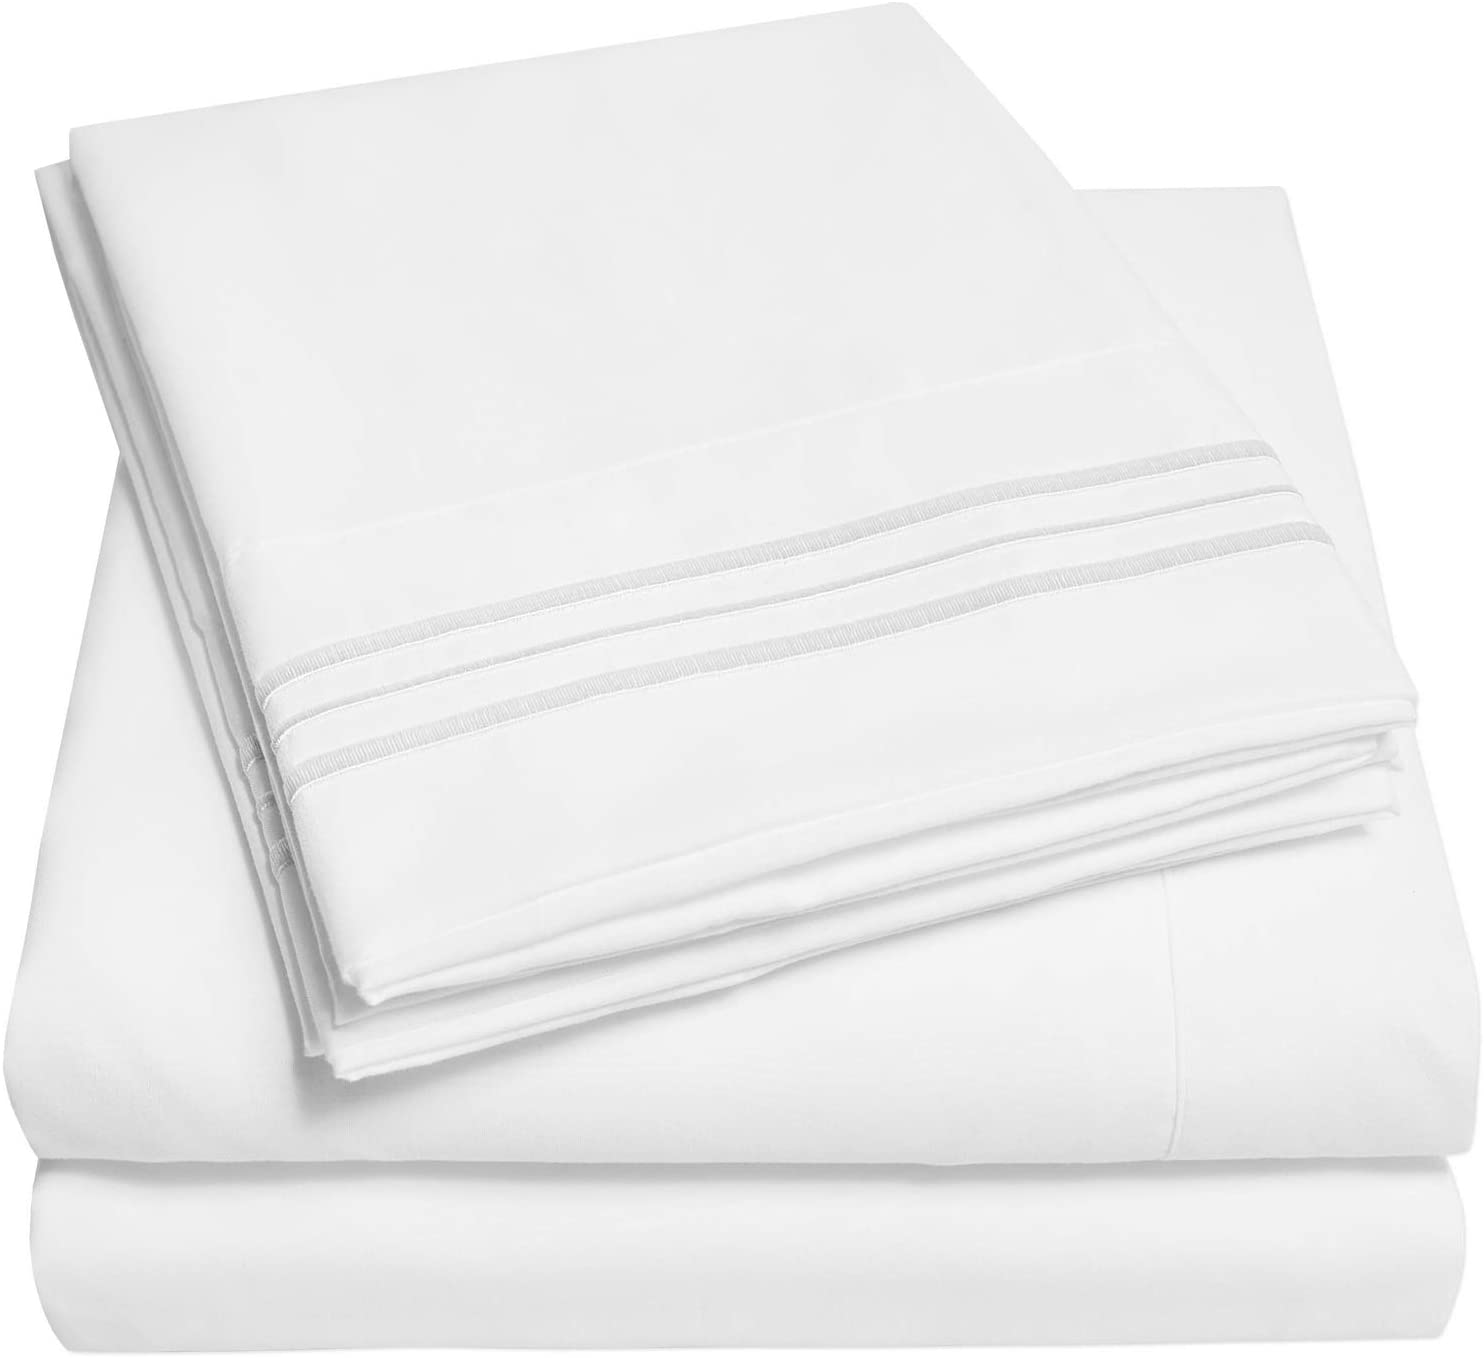 Sweet Home Collection Wrinkle Resistant Full Microfiber Sheets, 4-Piece